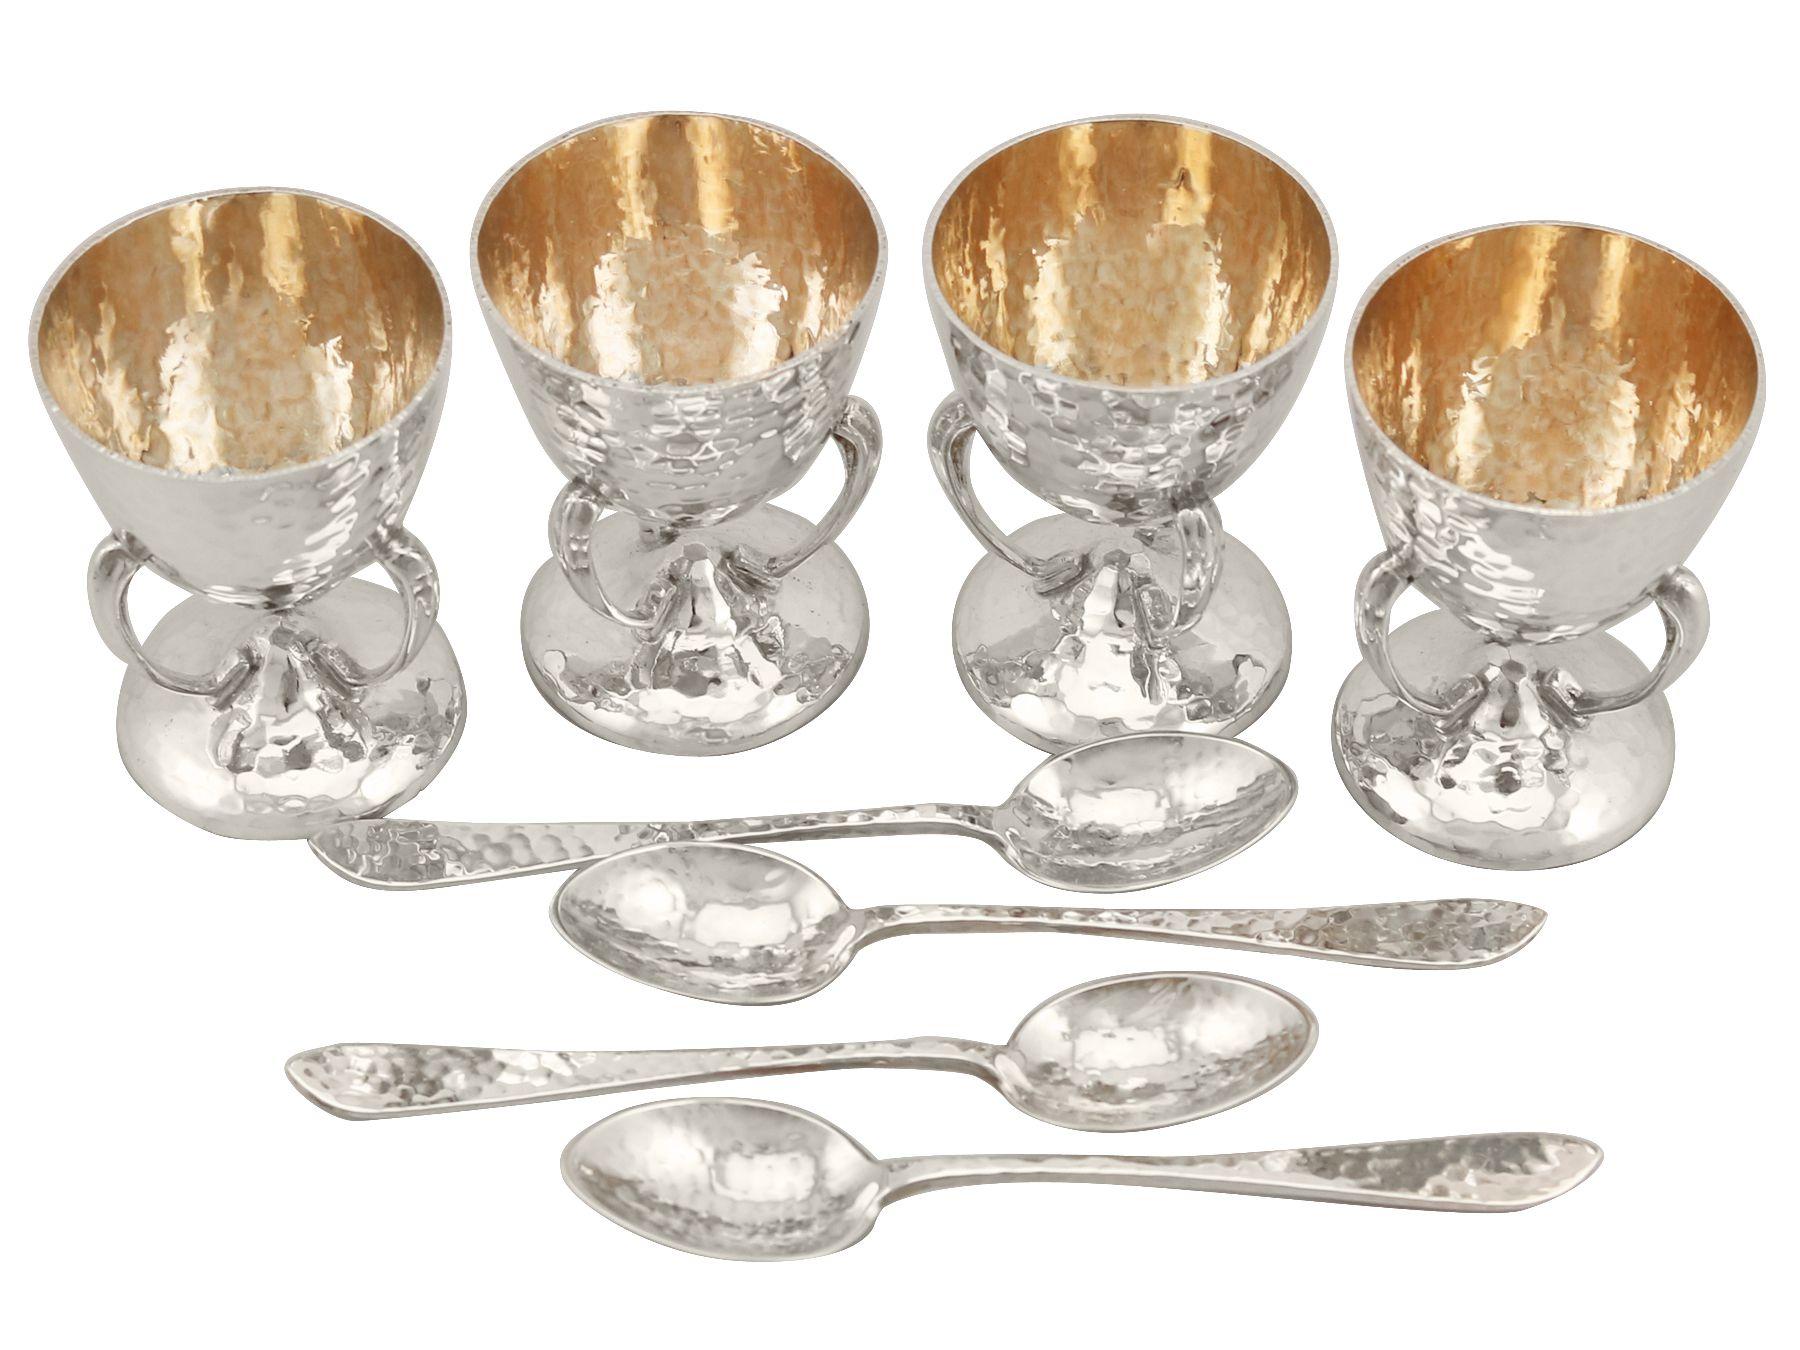 An exceptional, fine and impressive, set of four antique Edwardian Scottish sterling silver egg cups and spoons in the Art Nouveau style - boxed; part of our dining silverware collection

This exceptional antique Edwardian Scottish sterling silver